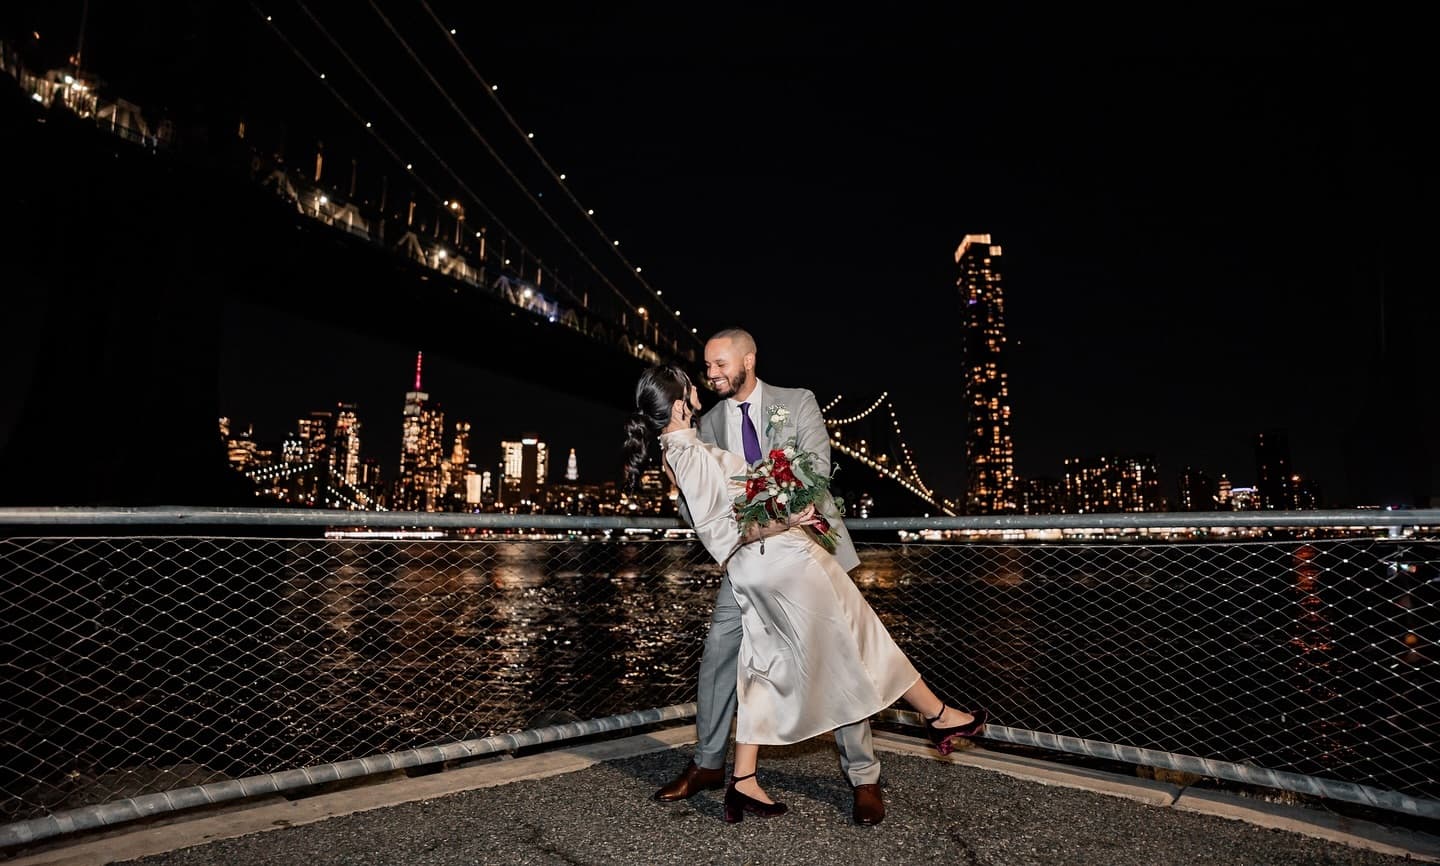 Why I Love Being a Wedding Photographer in NYC